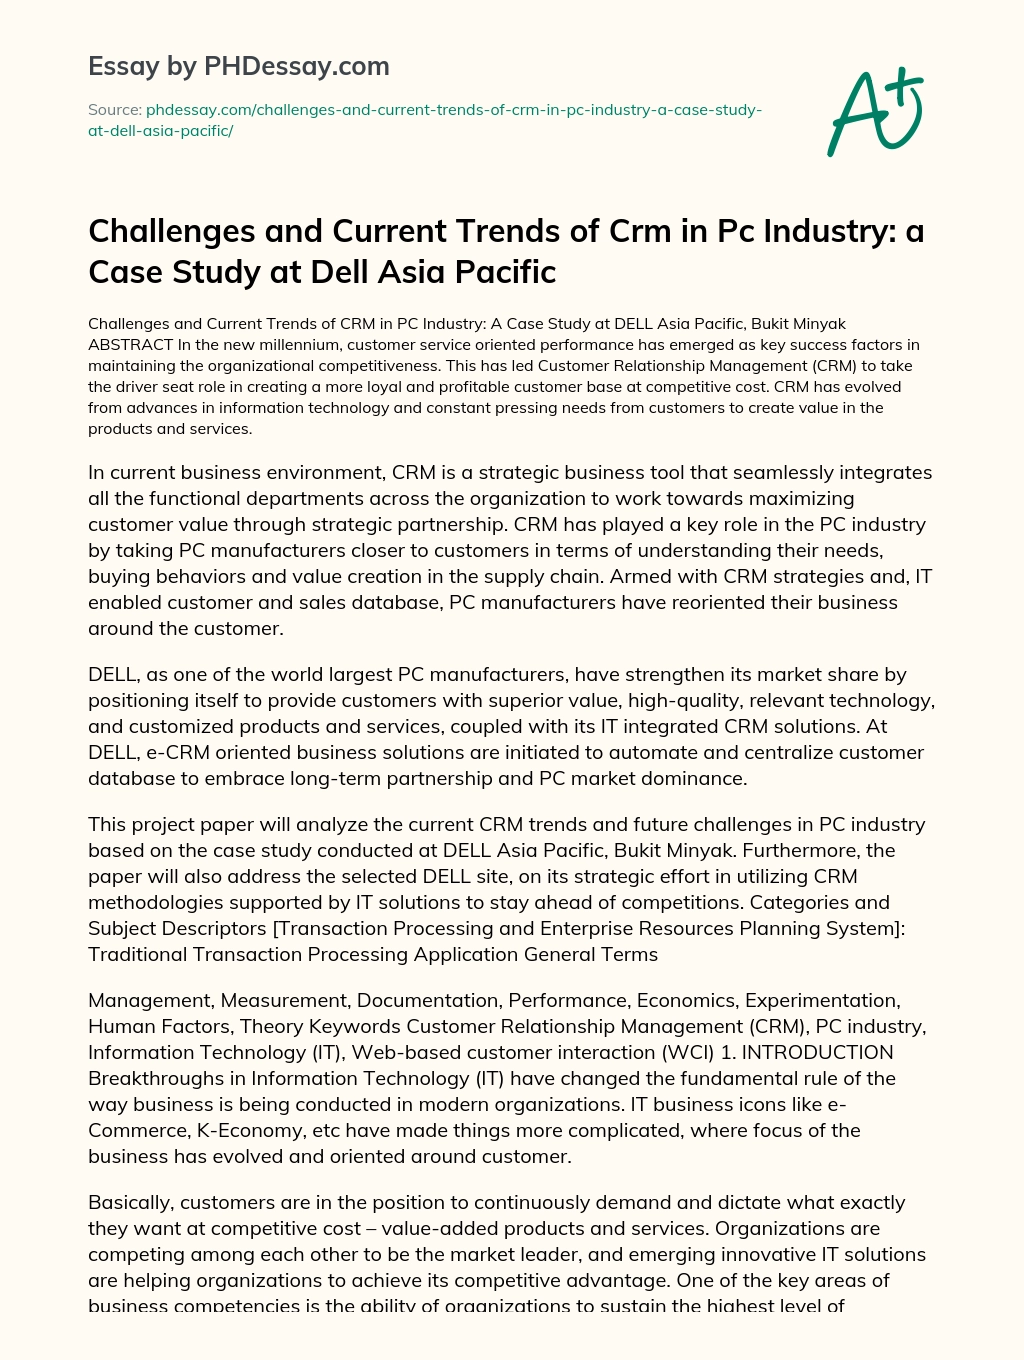 Challenges and Current Trends of Crm in Pc Industry: a Case Study at Dell Asia Pacific essay